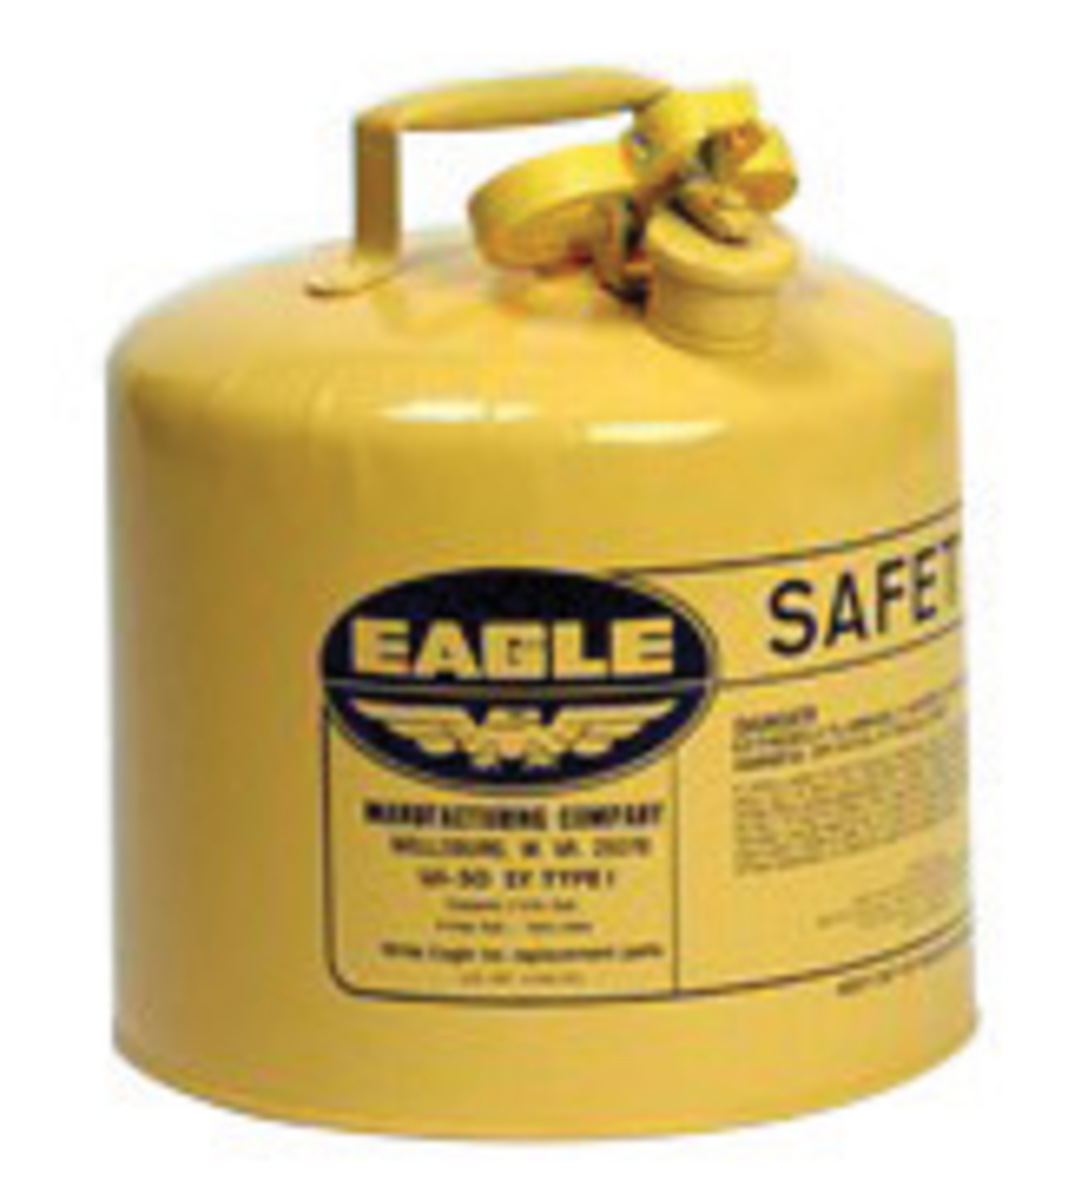 Eagle 5 Gallon Yellow 24 Gauge Galvanized Steel Type I Safety Can With Non-Sparking Flame Arrestor Without Funnel